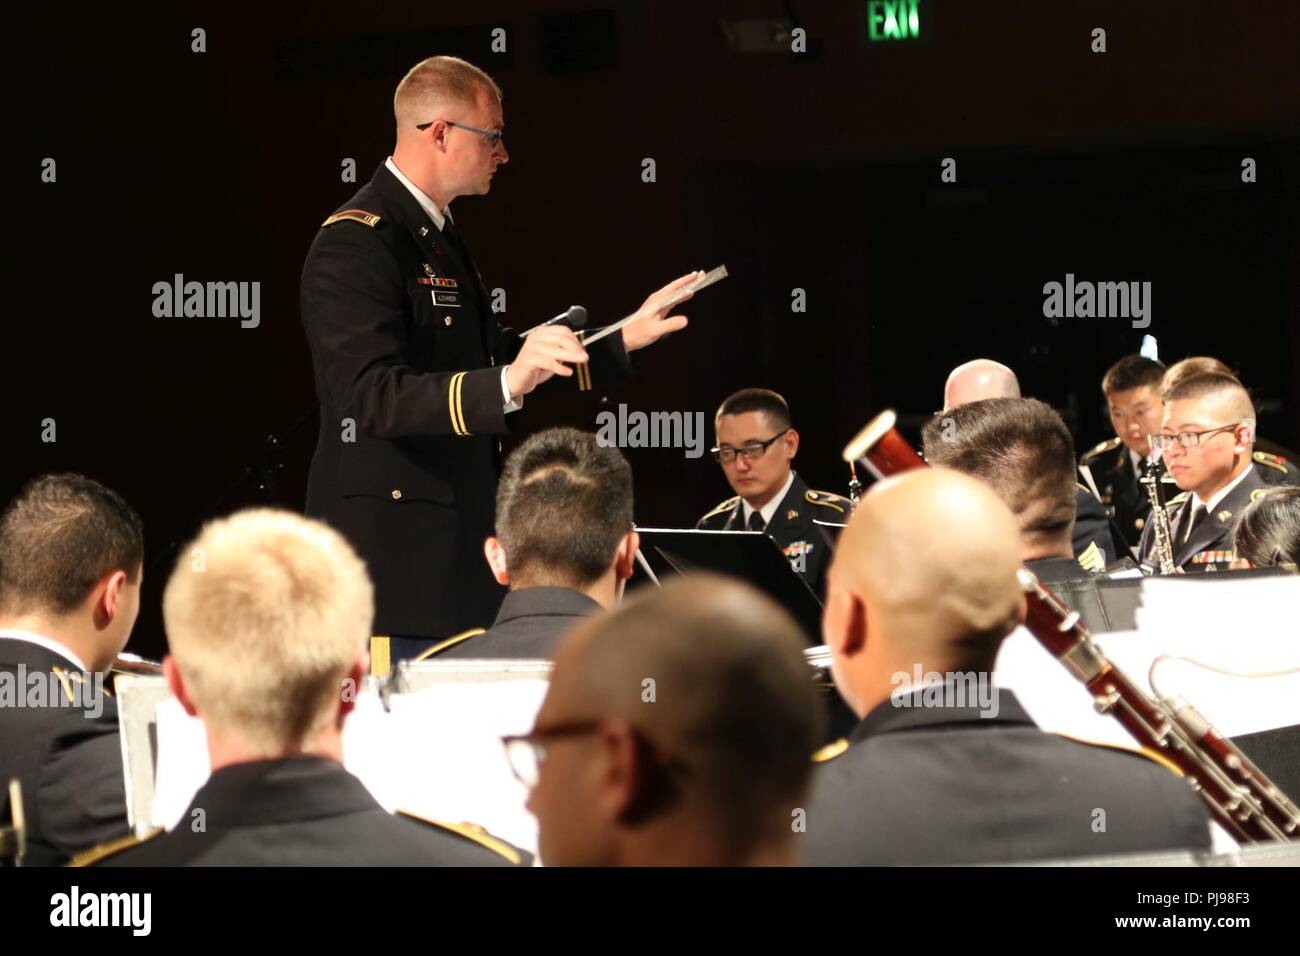 Chief Warrant Officer Three Ashley Alexander, Commander of the 234th Army Band guides the 111th Army Band and 234th Army Band through a song during their performance at Astoria High School in Astoria High School in Astoria, Oregon, July 7, 2018. The concert is the second collaboration between the 111th Army Band and the 234th Army Band with efforts to display the results of their training in a live setting. Stock Photo